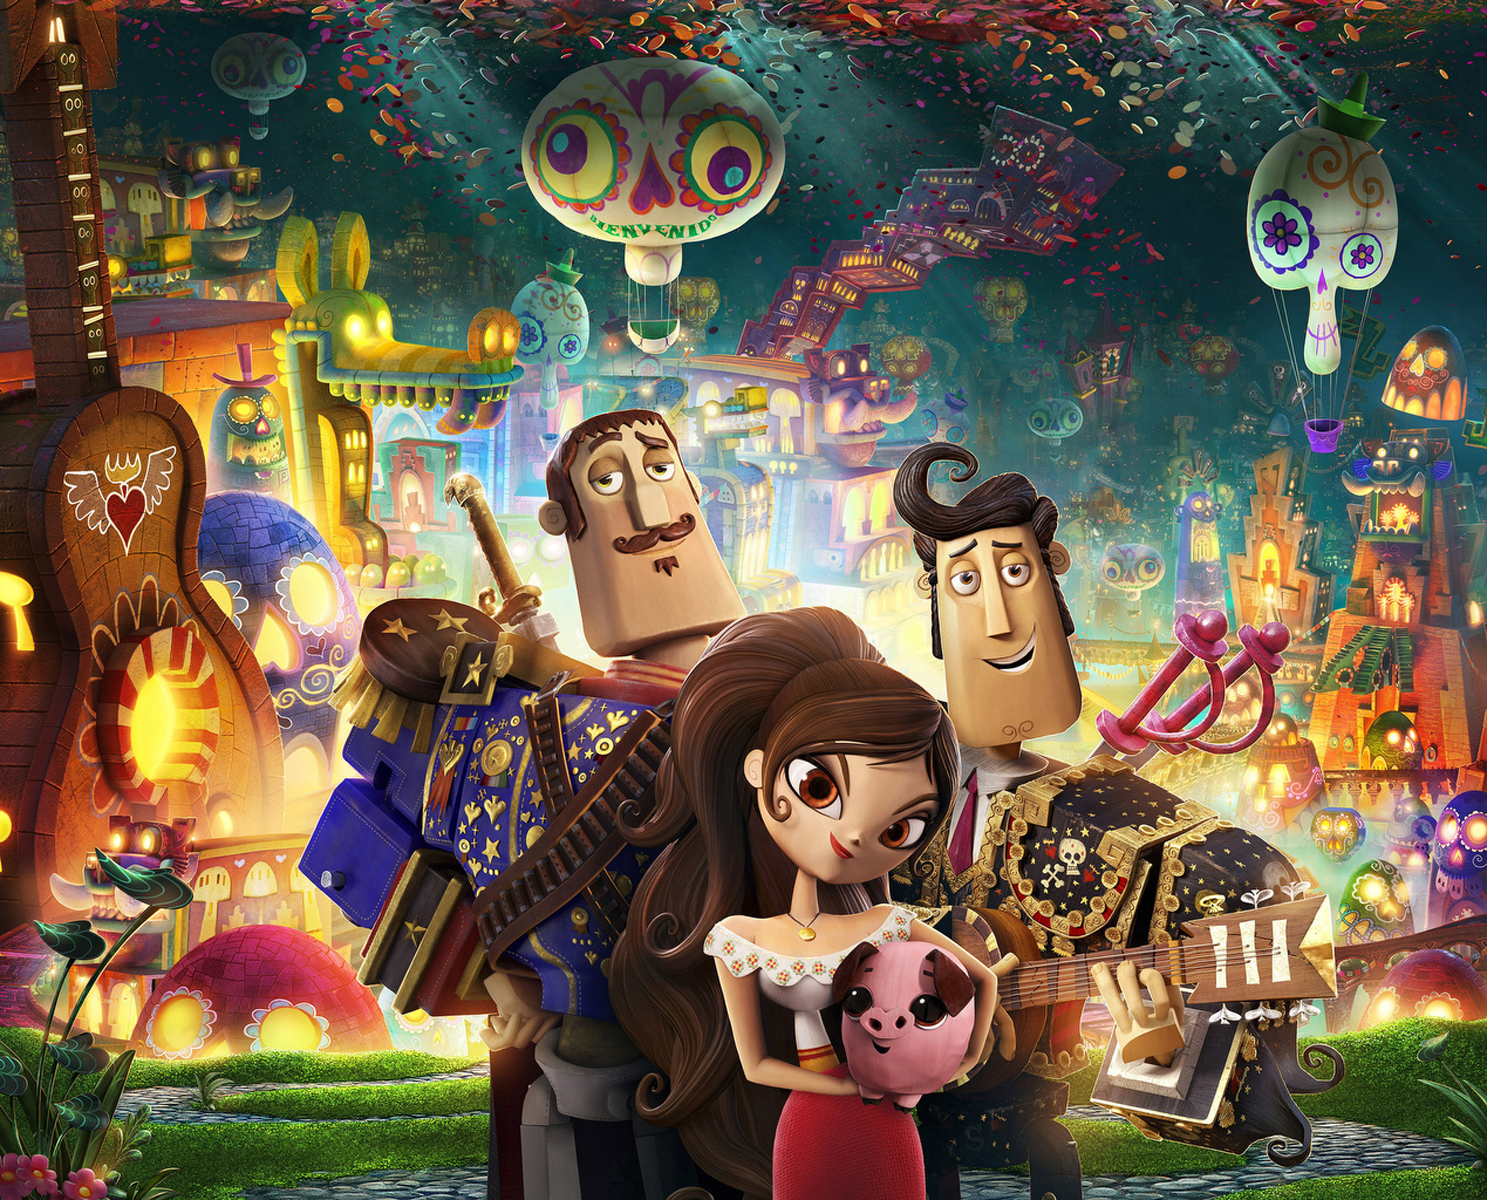 Scene from movie 'The Book of Life'